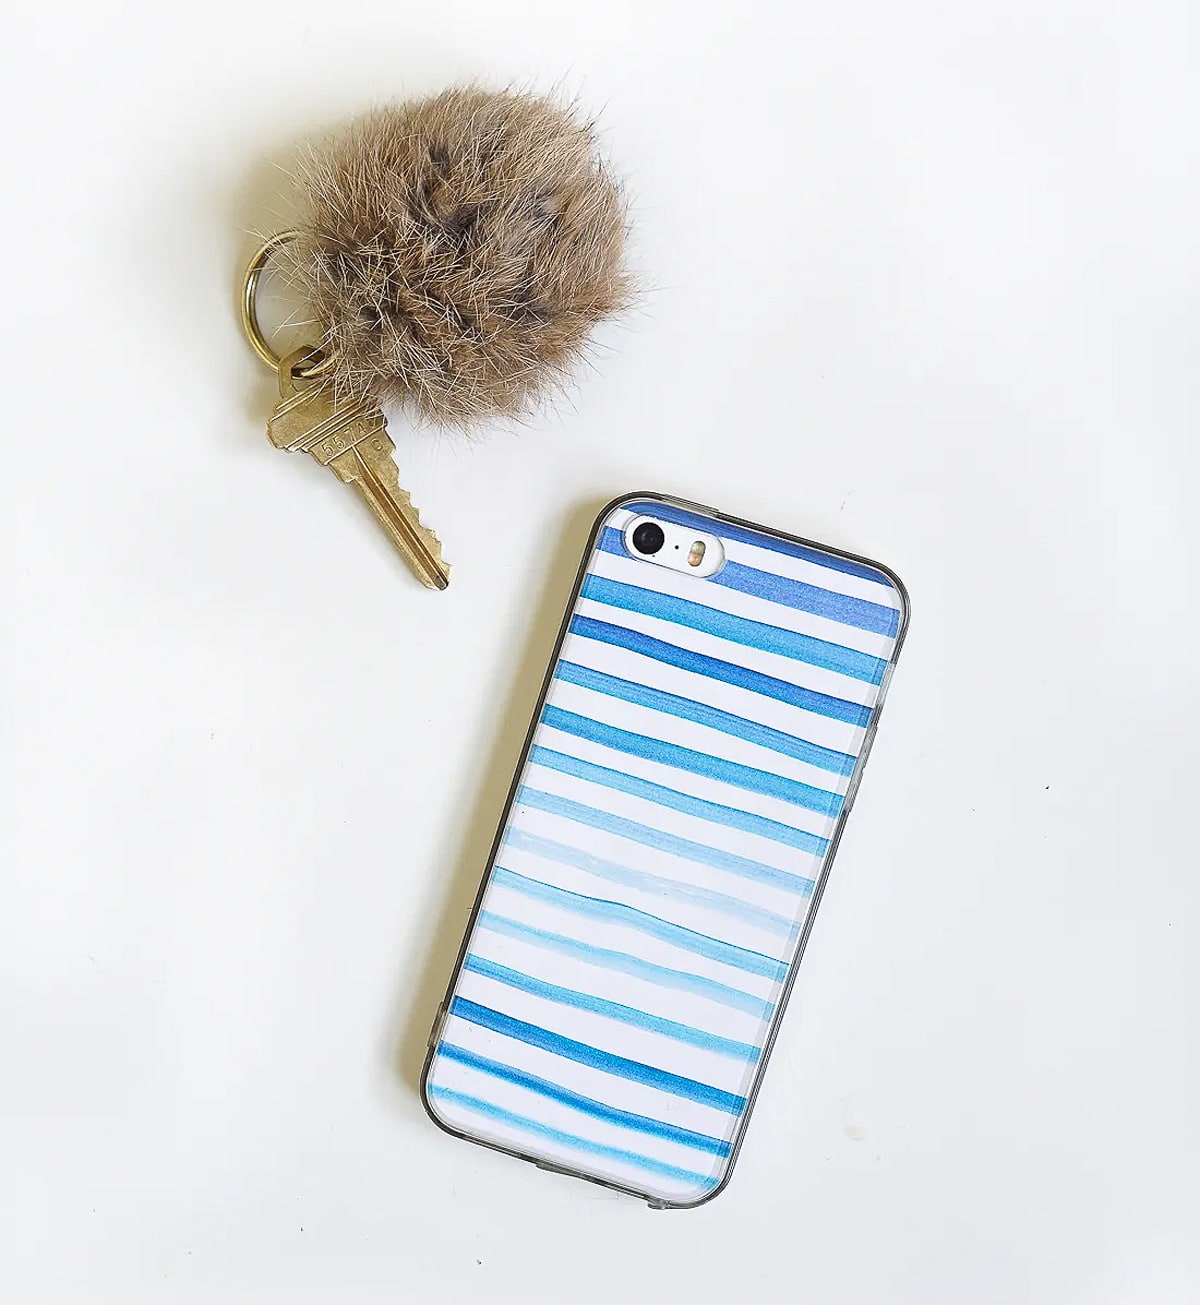 watercolor phone case and key